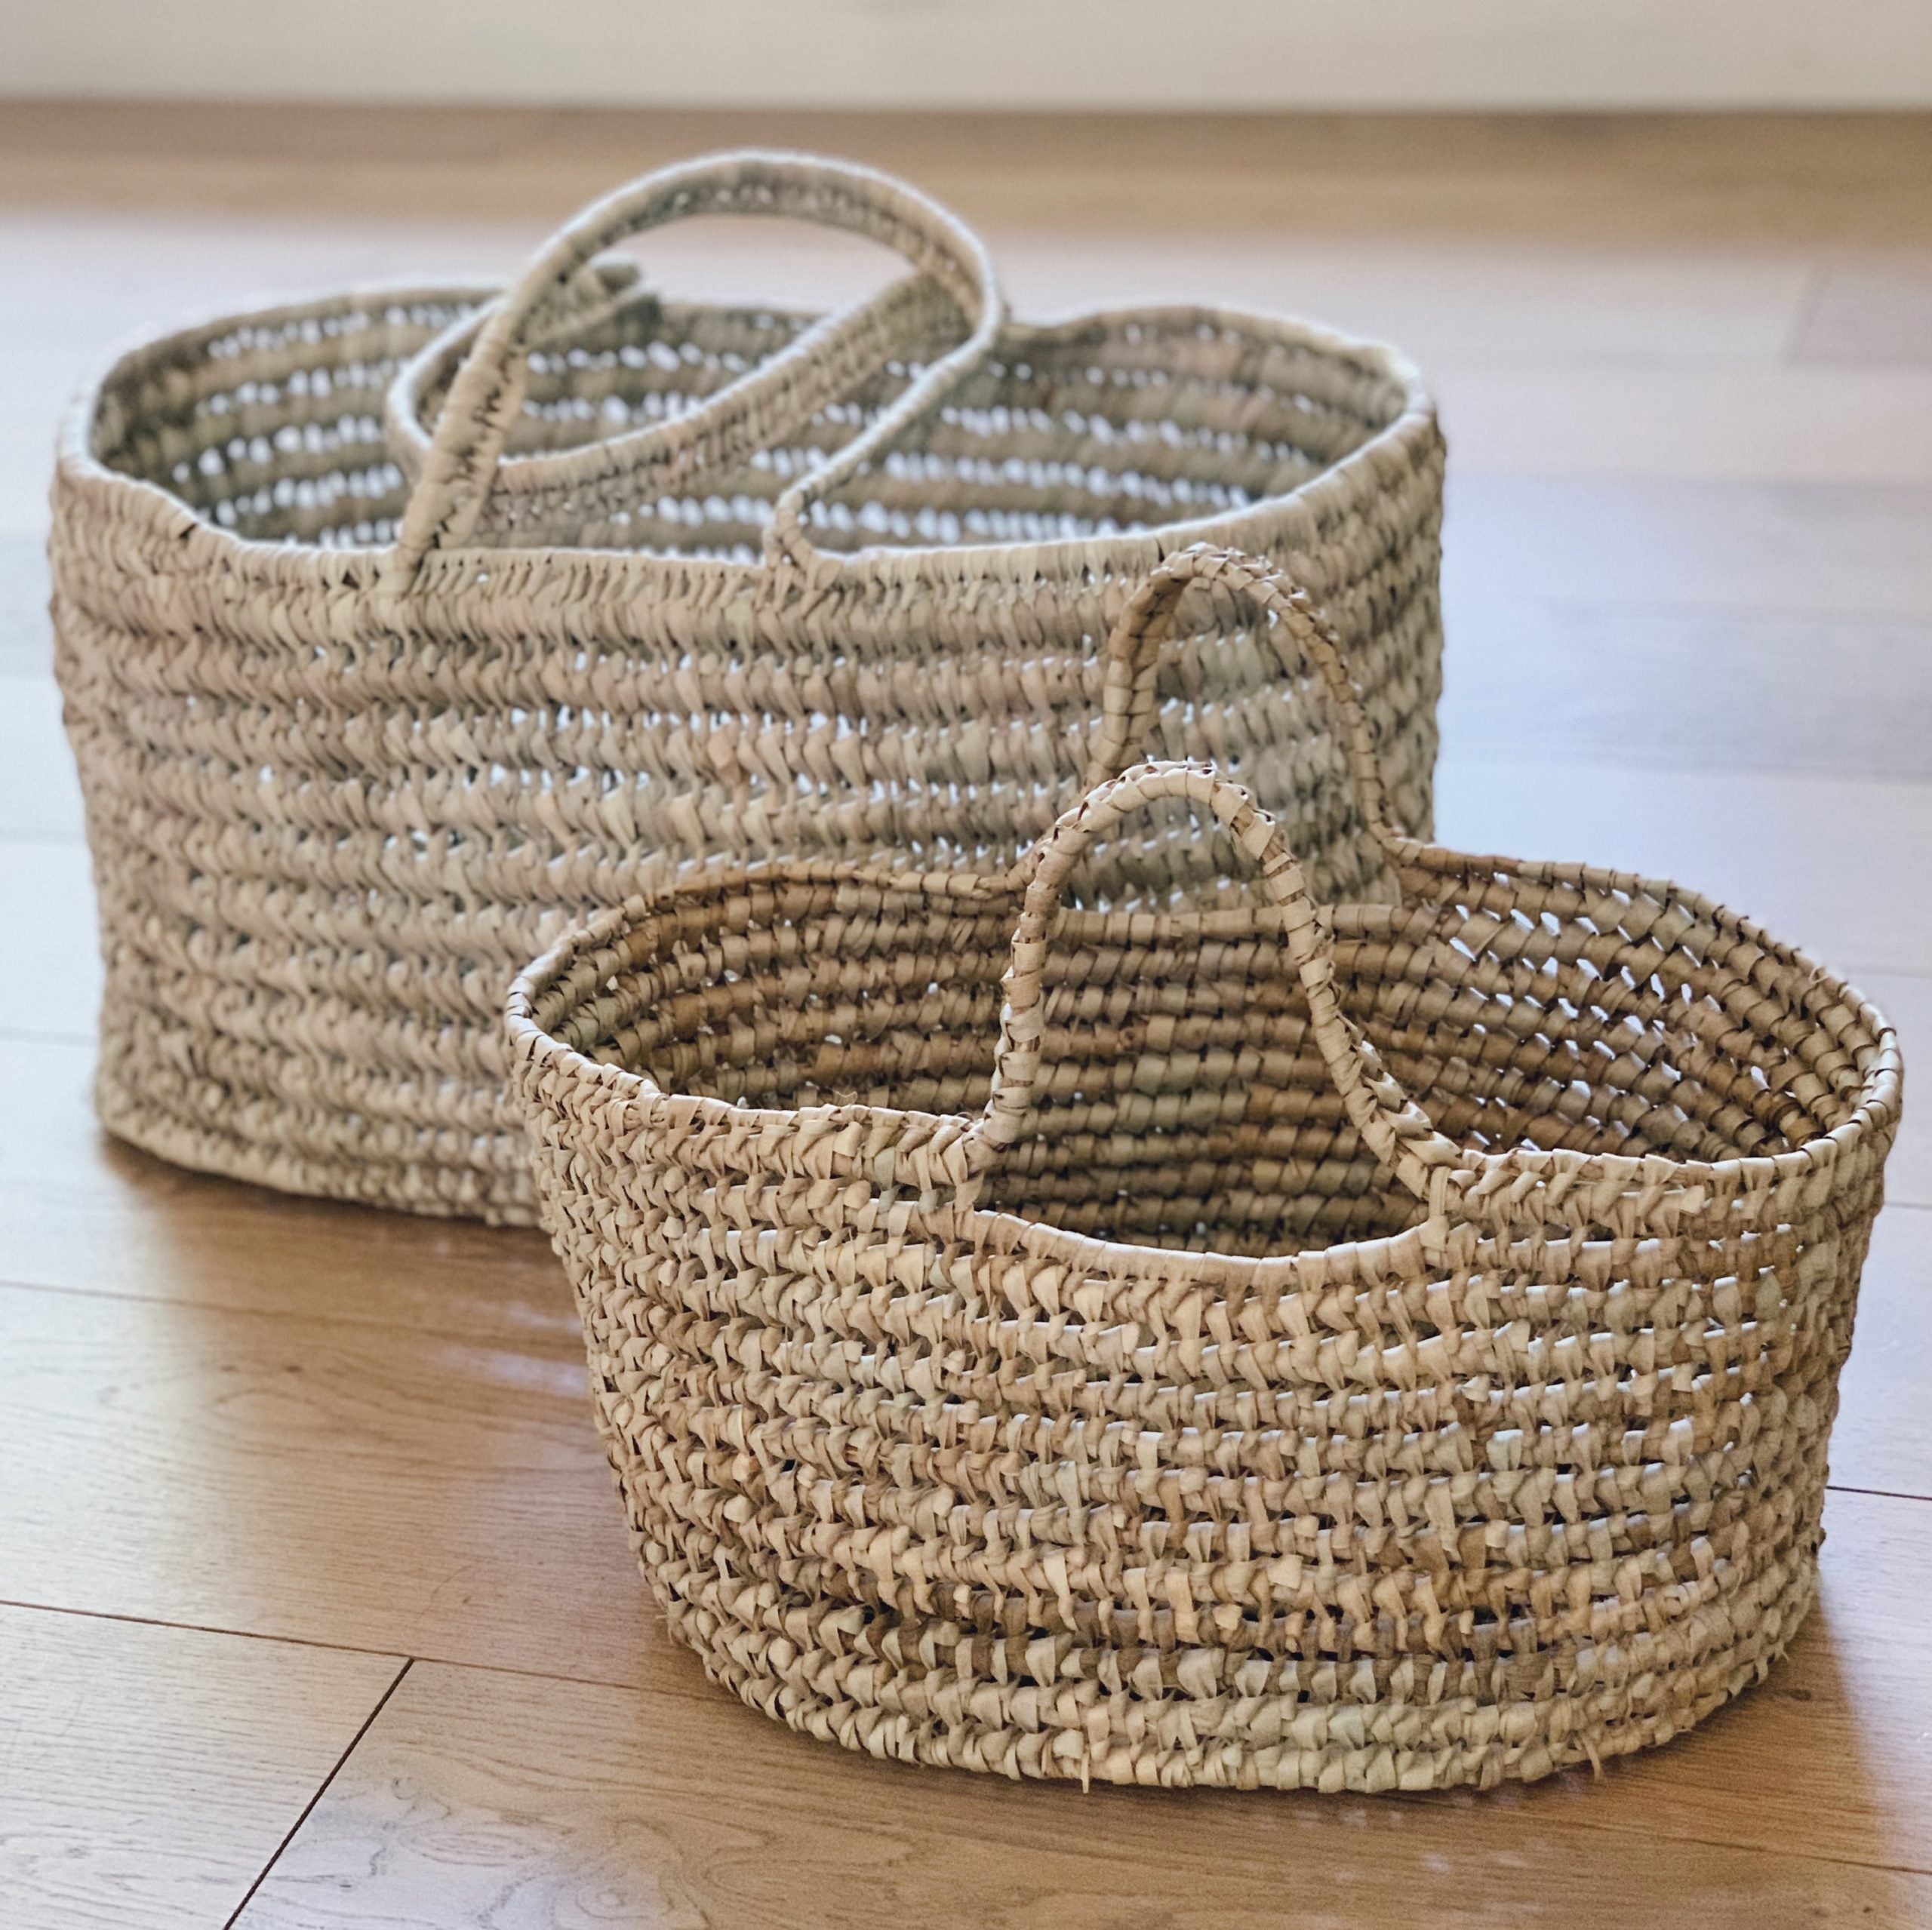 https://cdn.shopify.com/s/files/1/0707/7632/4397/products/baskets66-scaled-1.jpg?v=1674064701&width=2560